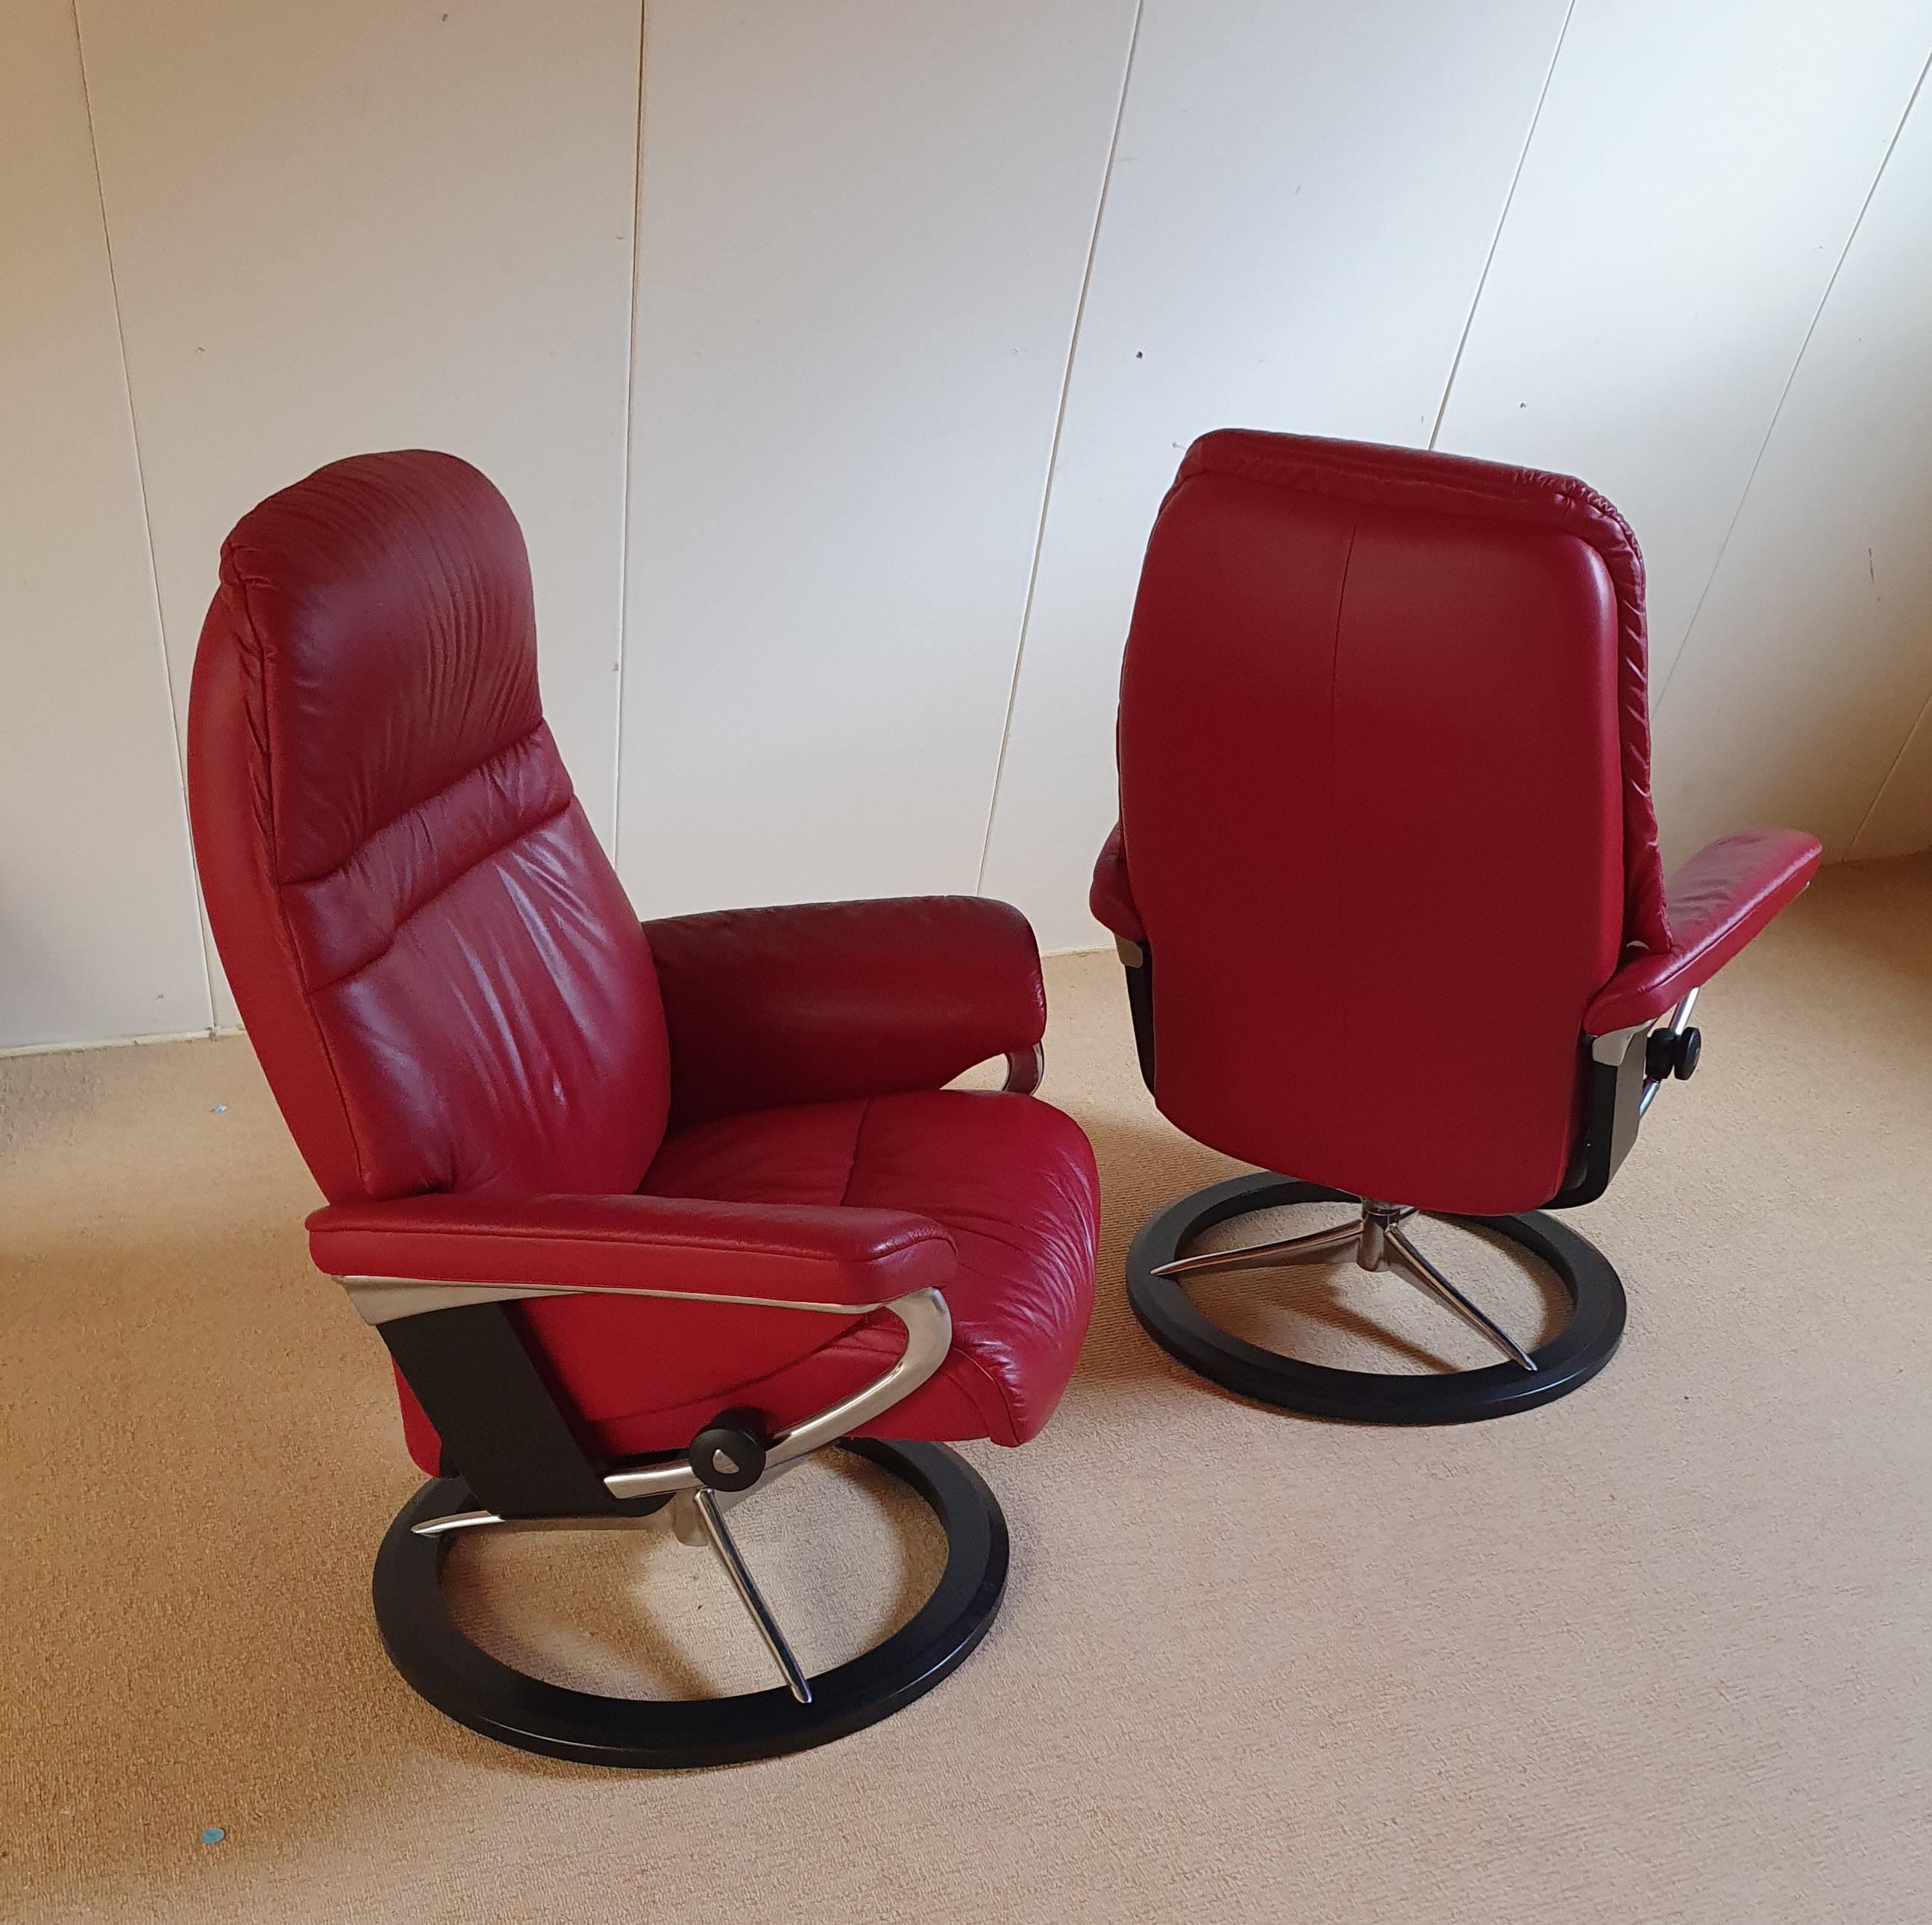 2 x Stressless Aura Recliner chairs with Signature in Cori leather Brick Red 6